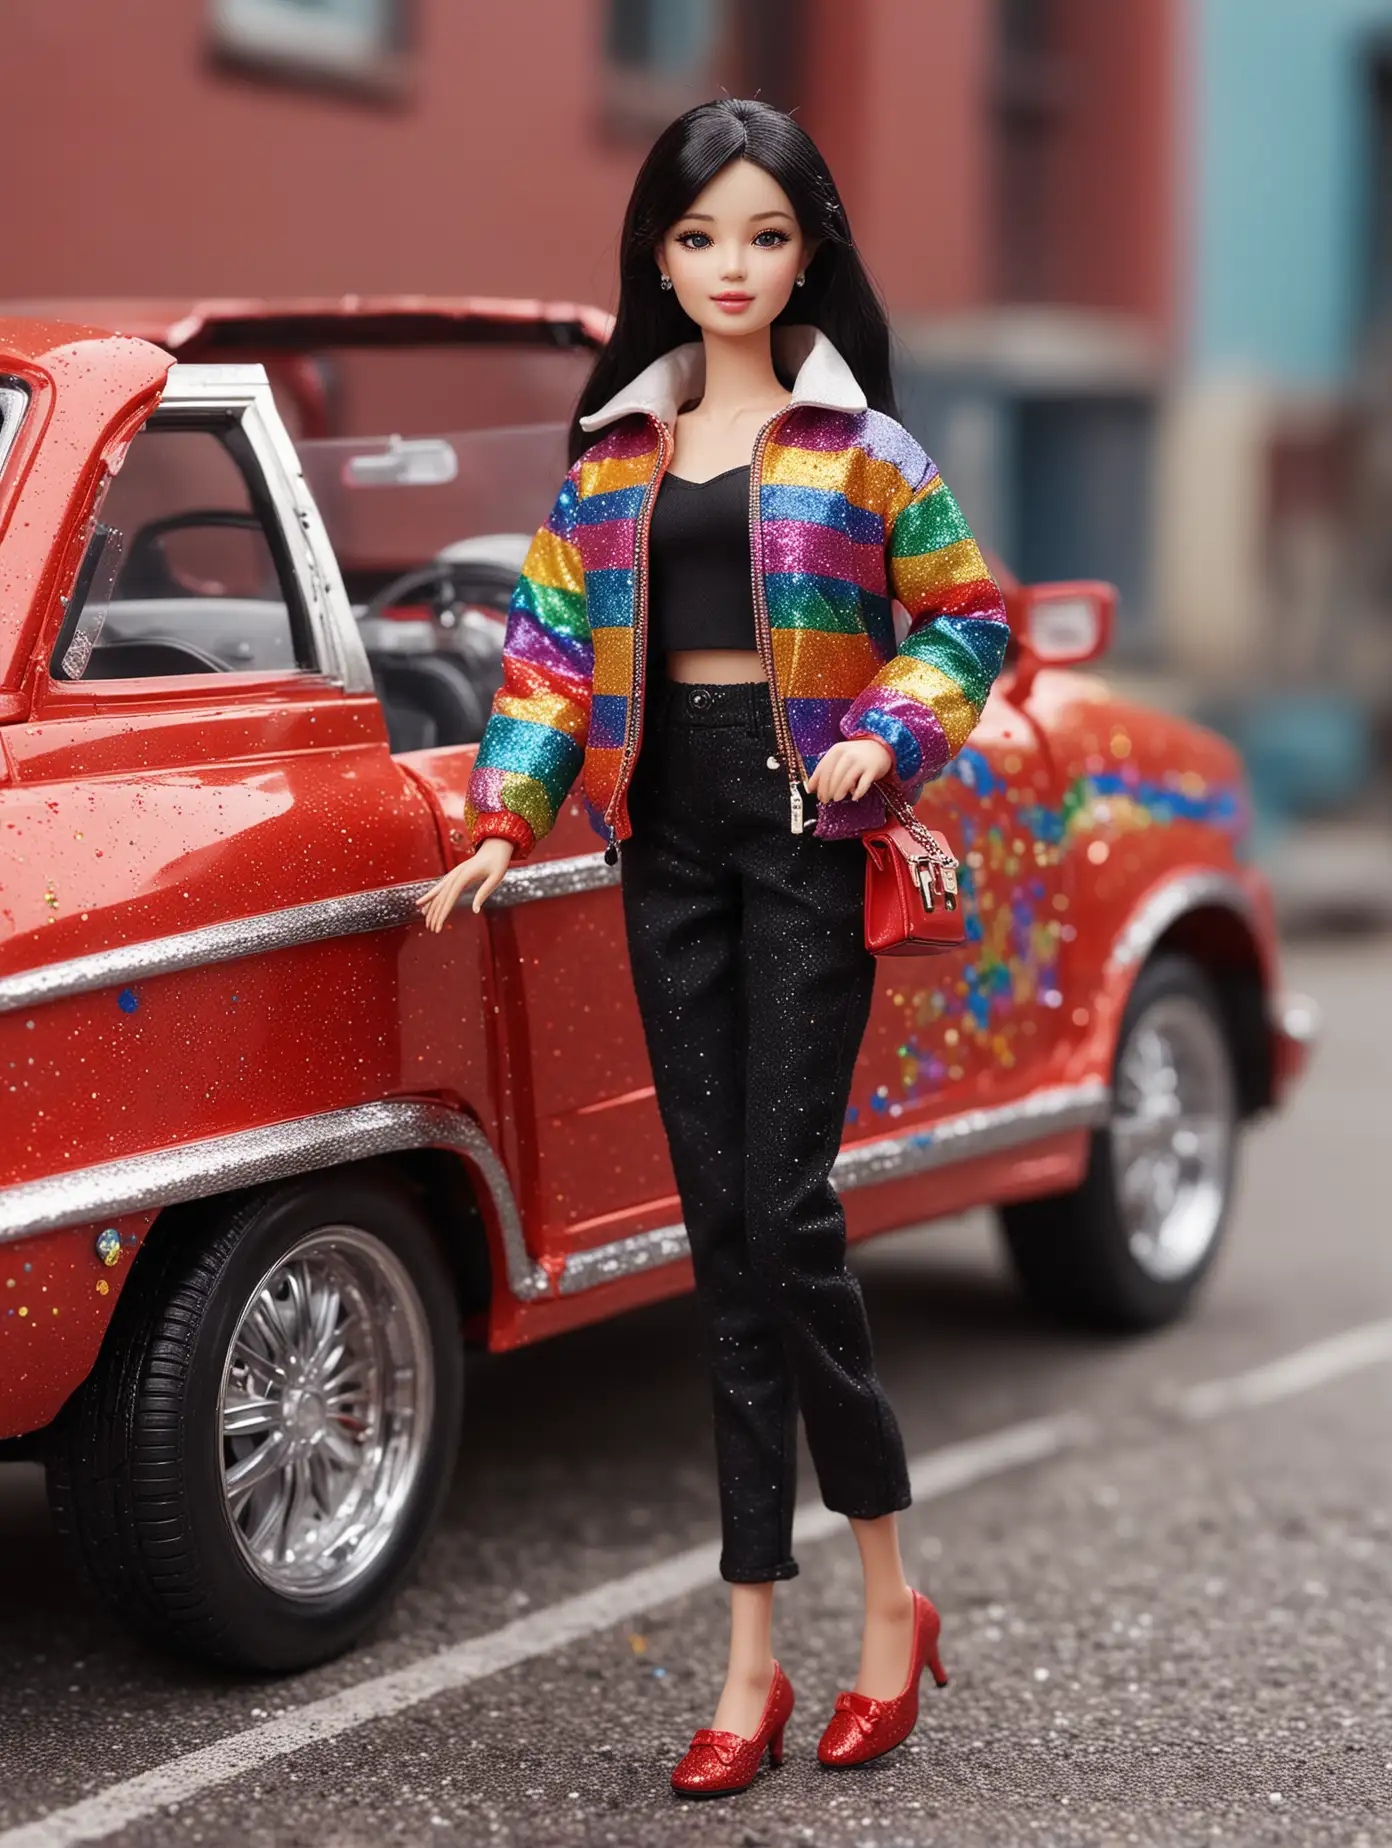 Stylish Kim Hyeyoon Barbie Doll Poses with Red Convertible